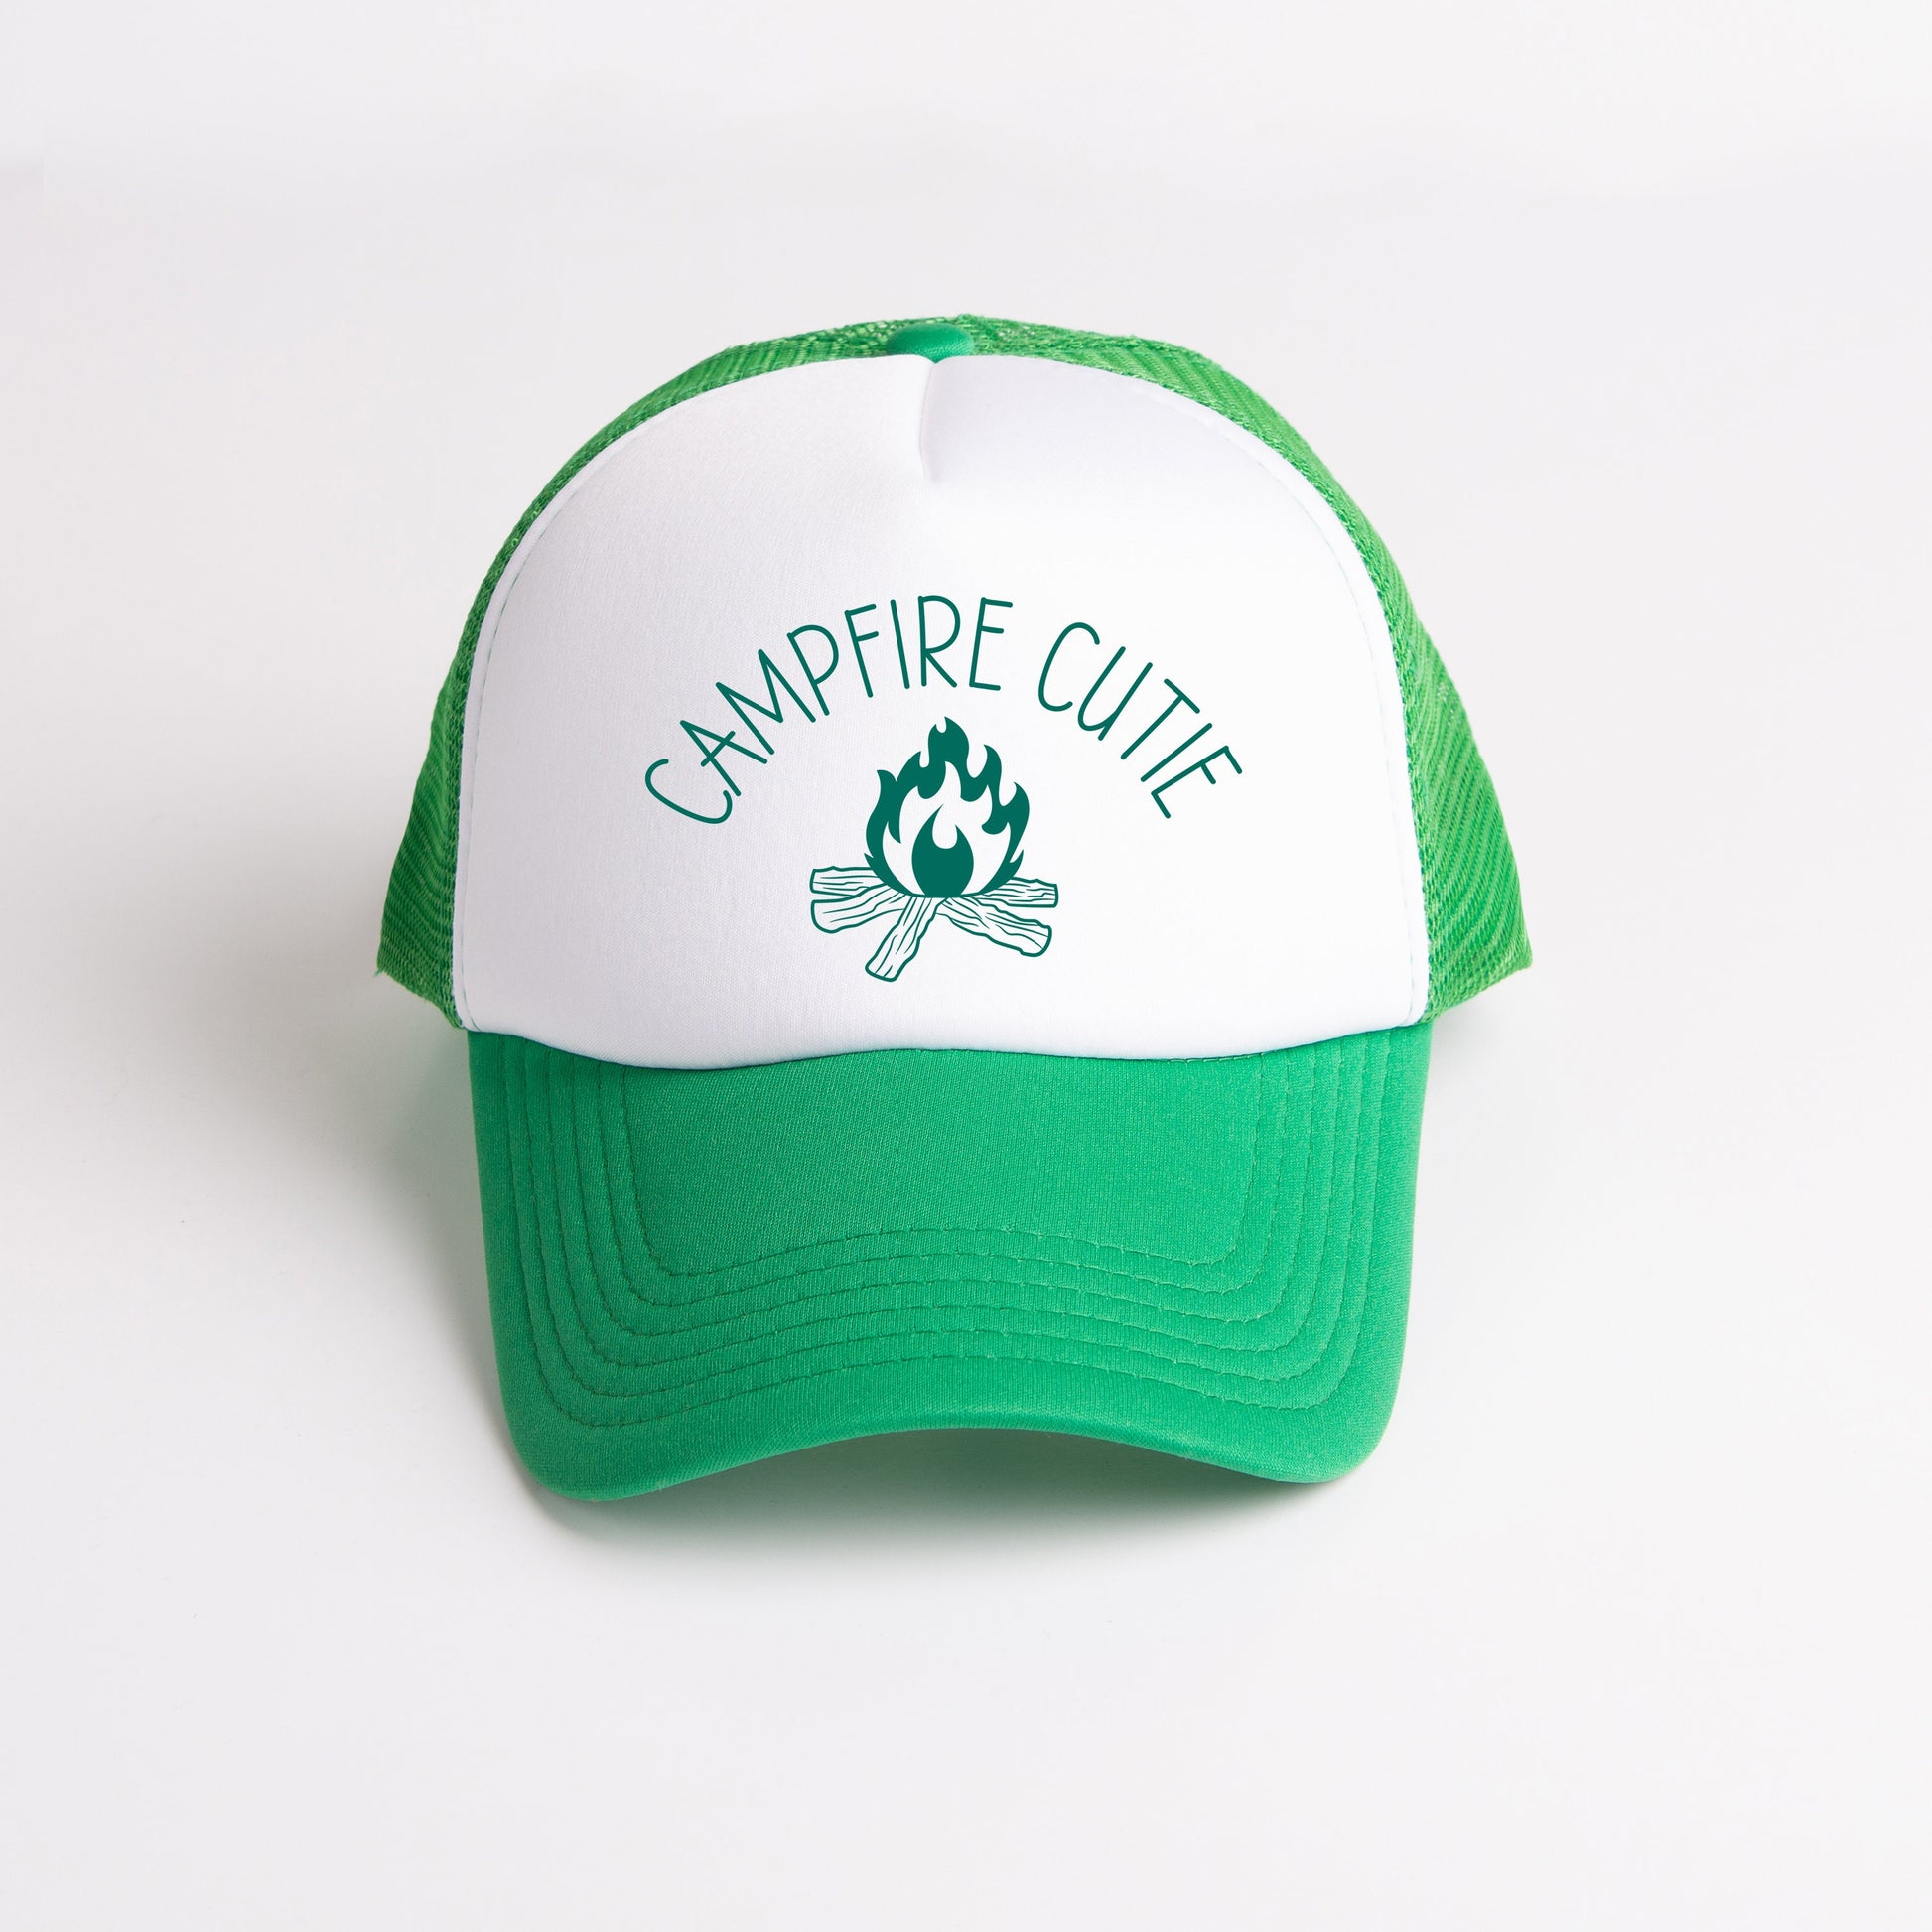 a green and white hat with a campfire cutie on it